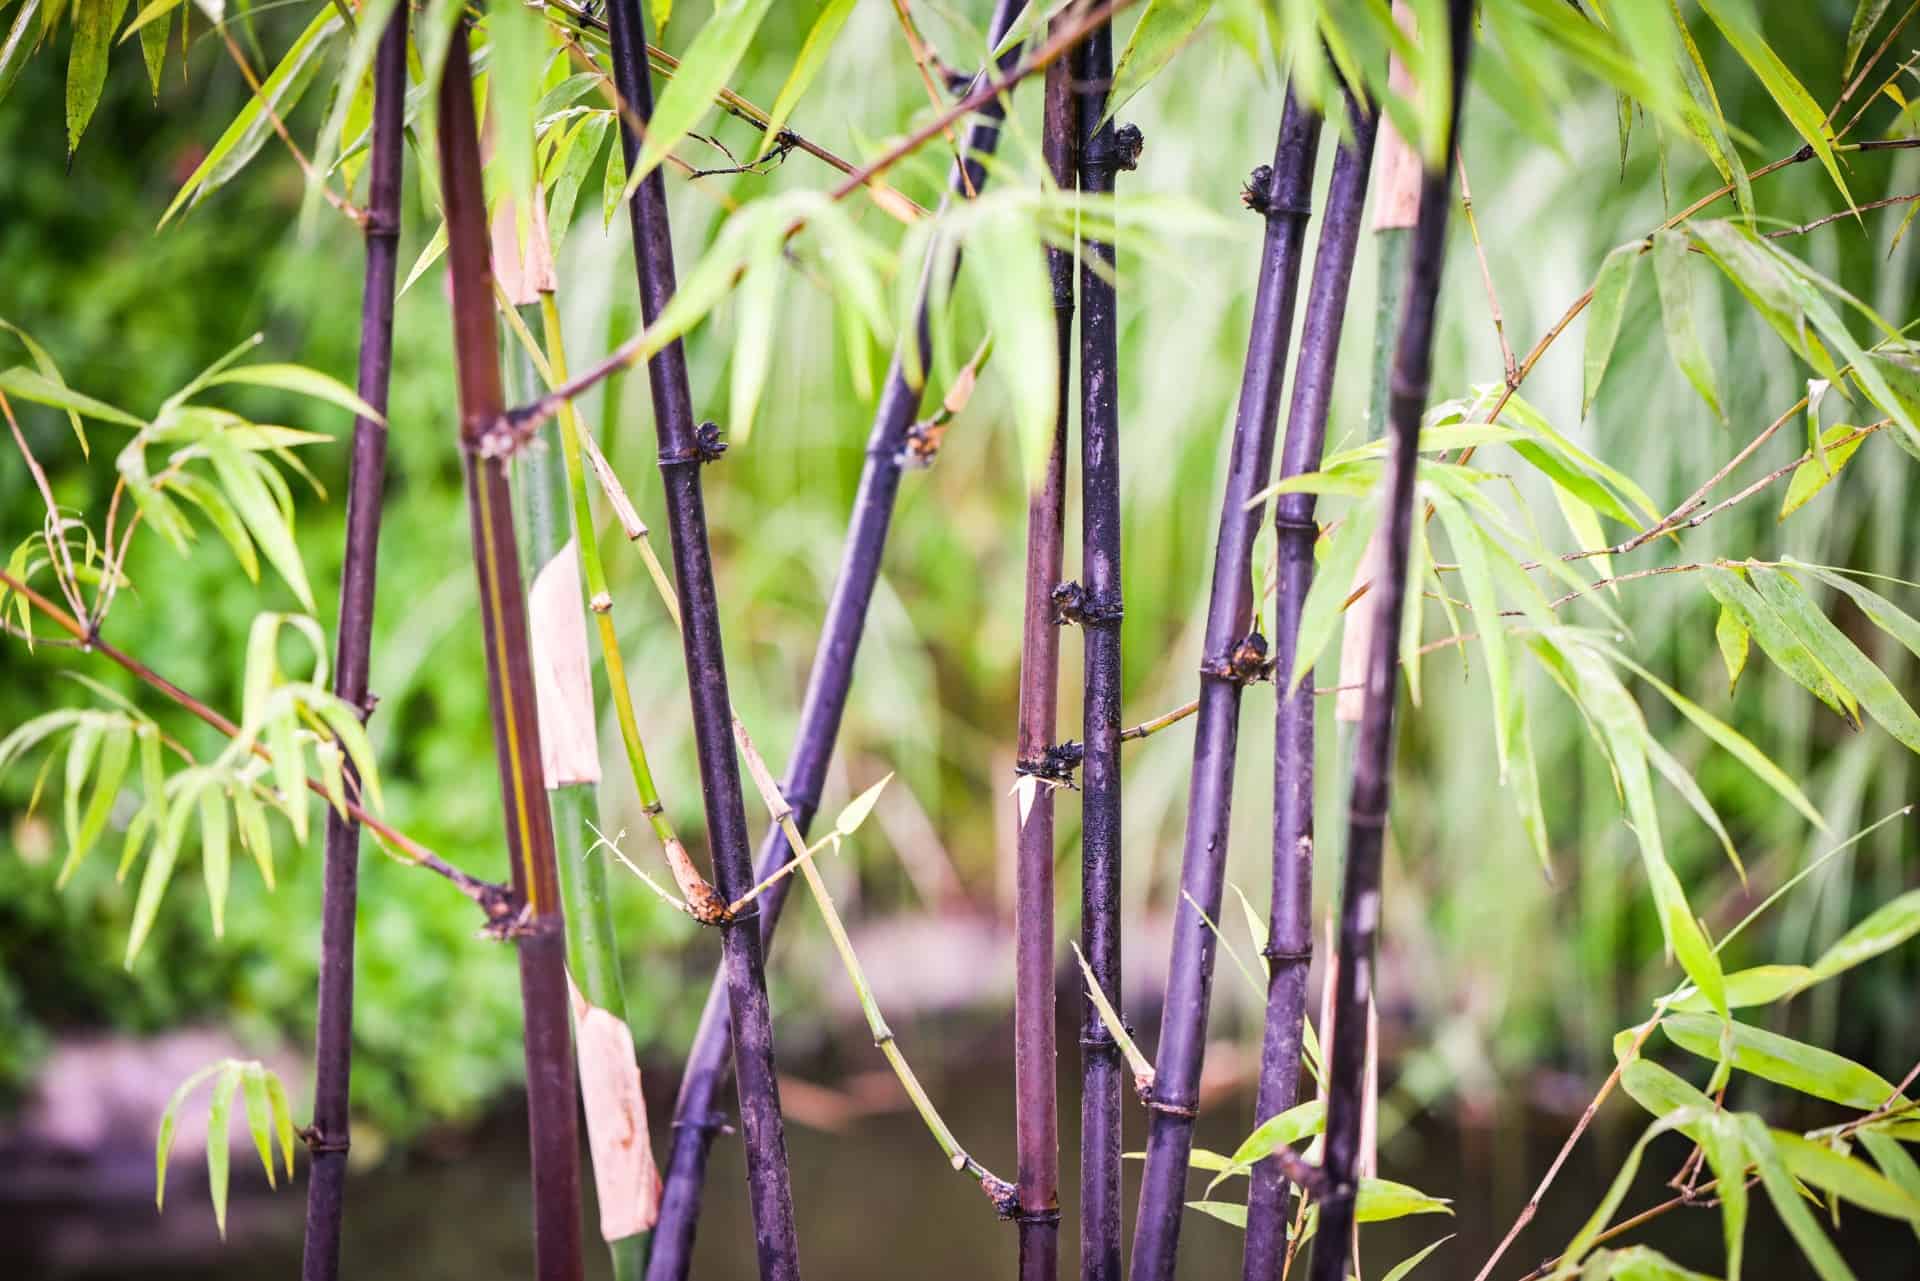 The timor black bamboo is slow-growing for a bamboo.